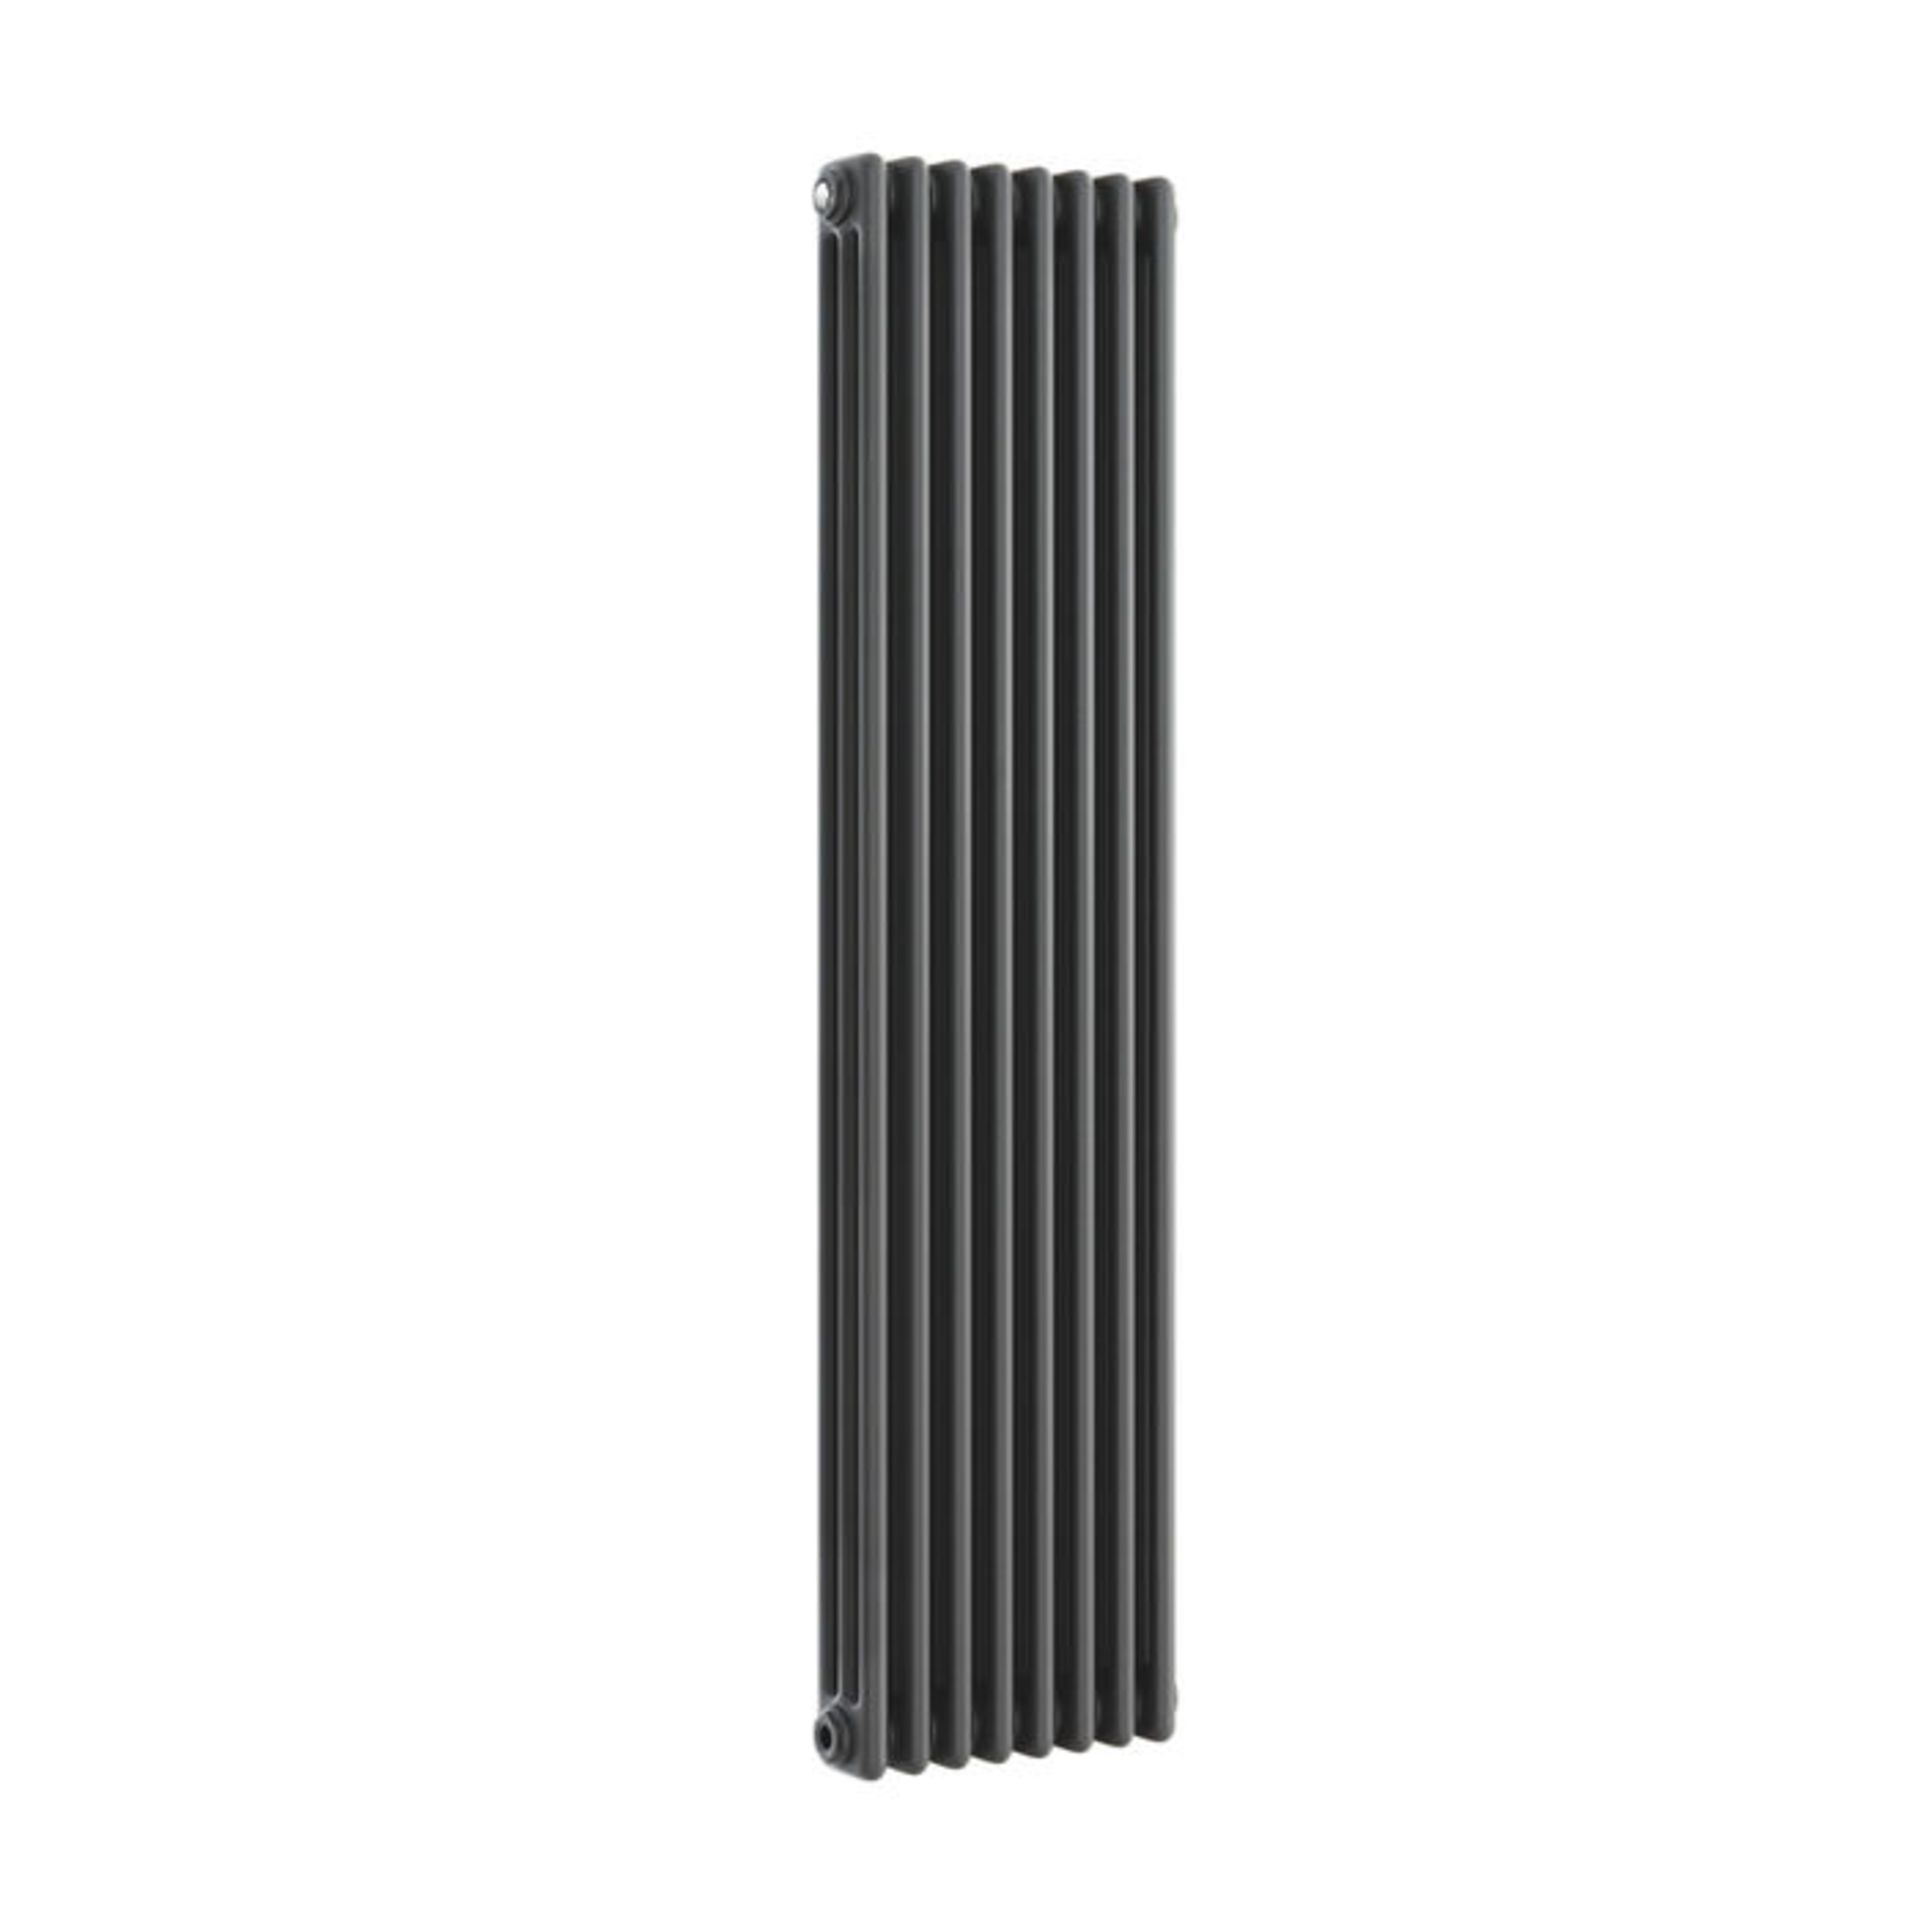 (TA181) 1500x380mm Anthracite Triple Panel Vertical Colosseum Traditional Radiator. RRP £399.99. - Image 4 of 4